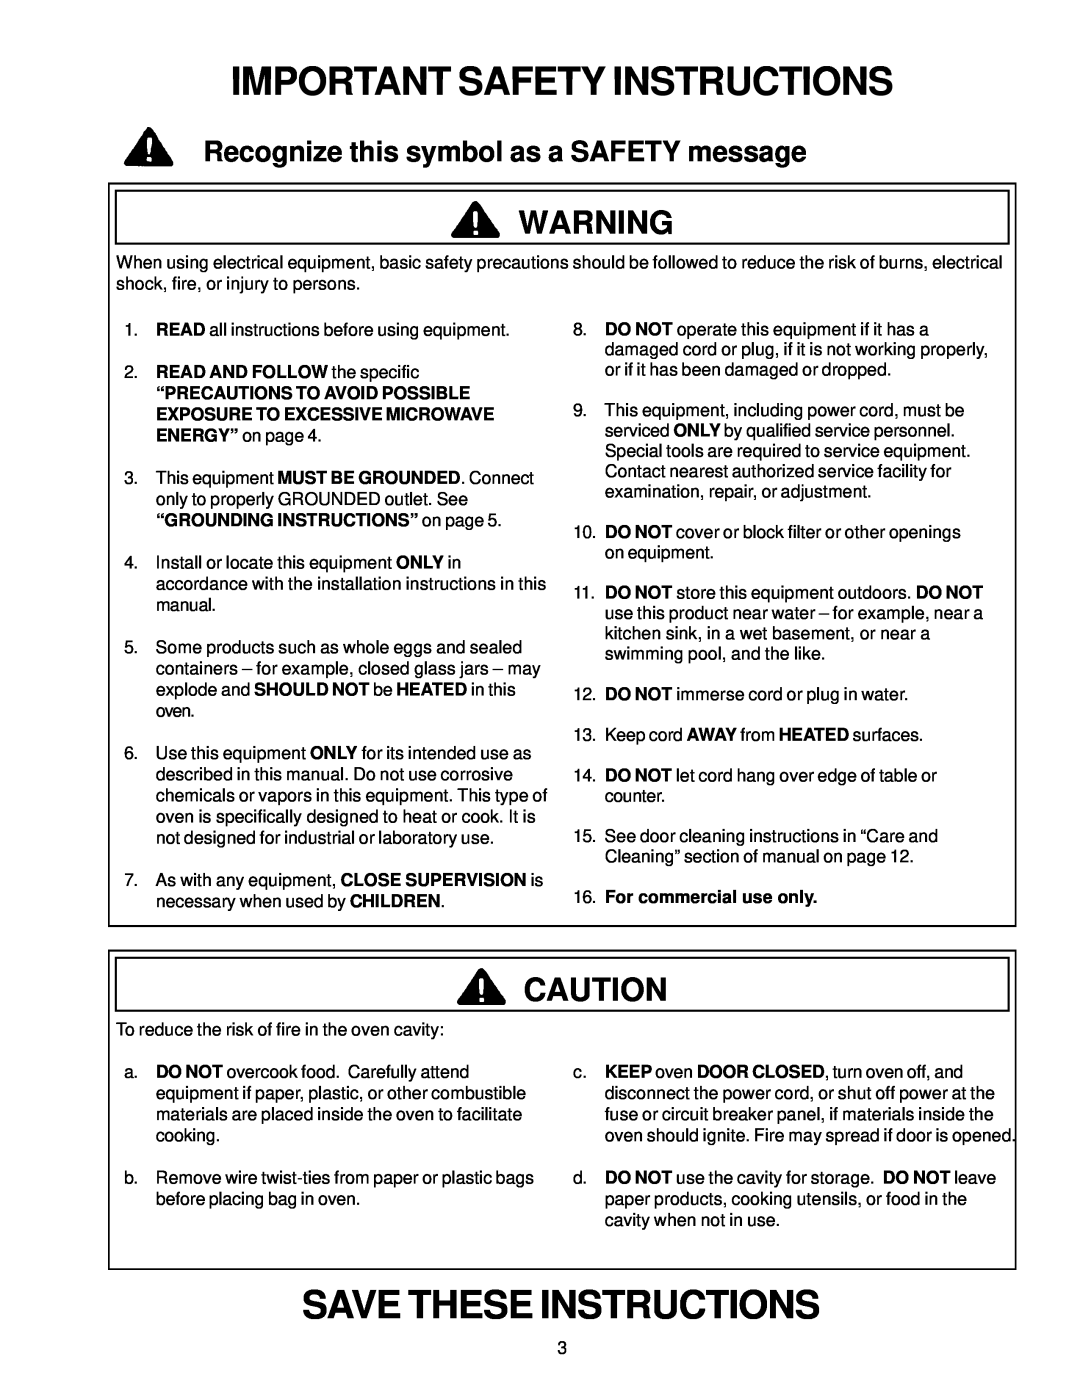 Amana Rfs9mp Important Safety Instructions, Save These Instructions, READ AND FOLLOW the specific, For commercial use only 